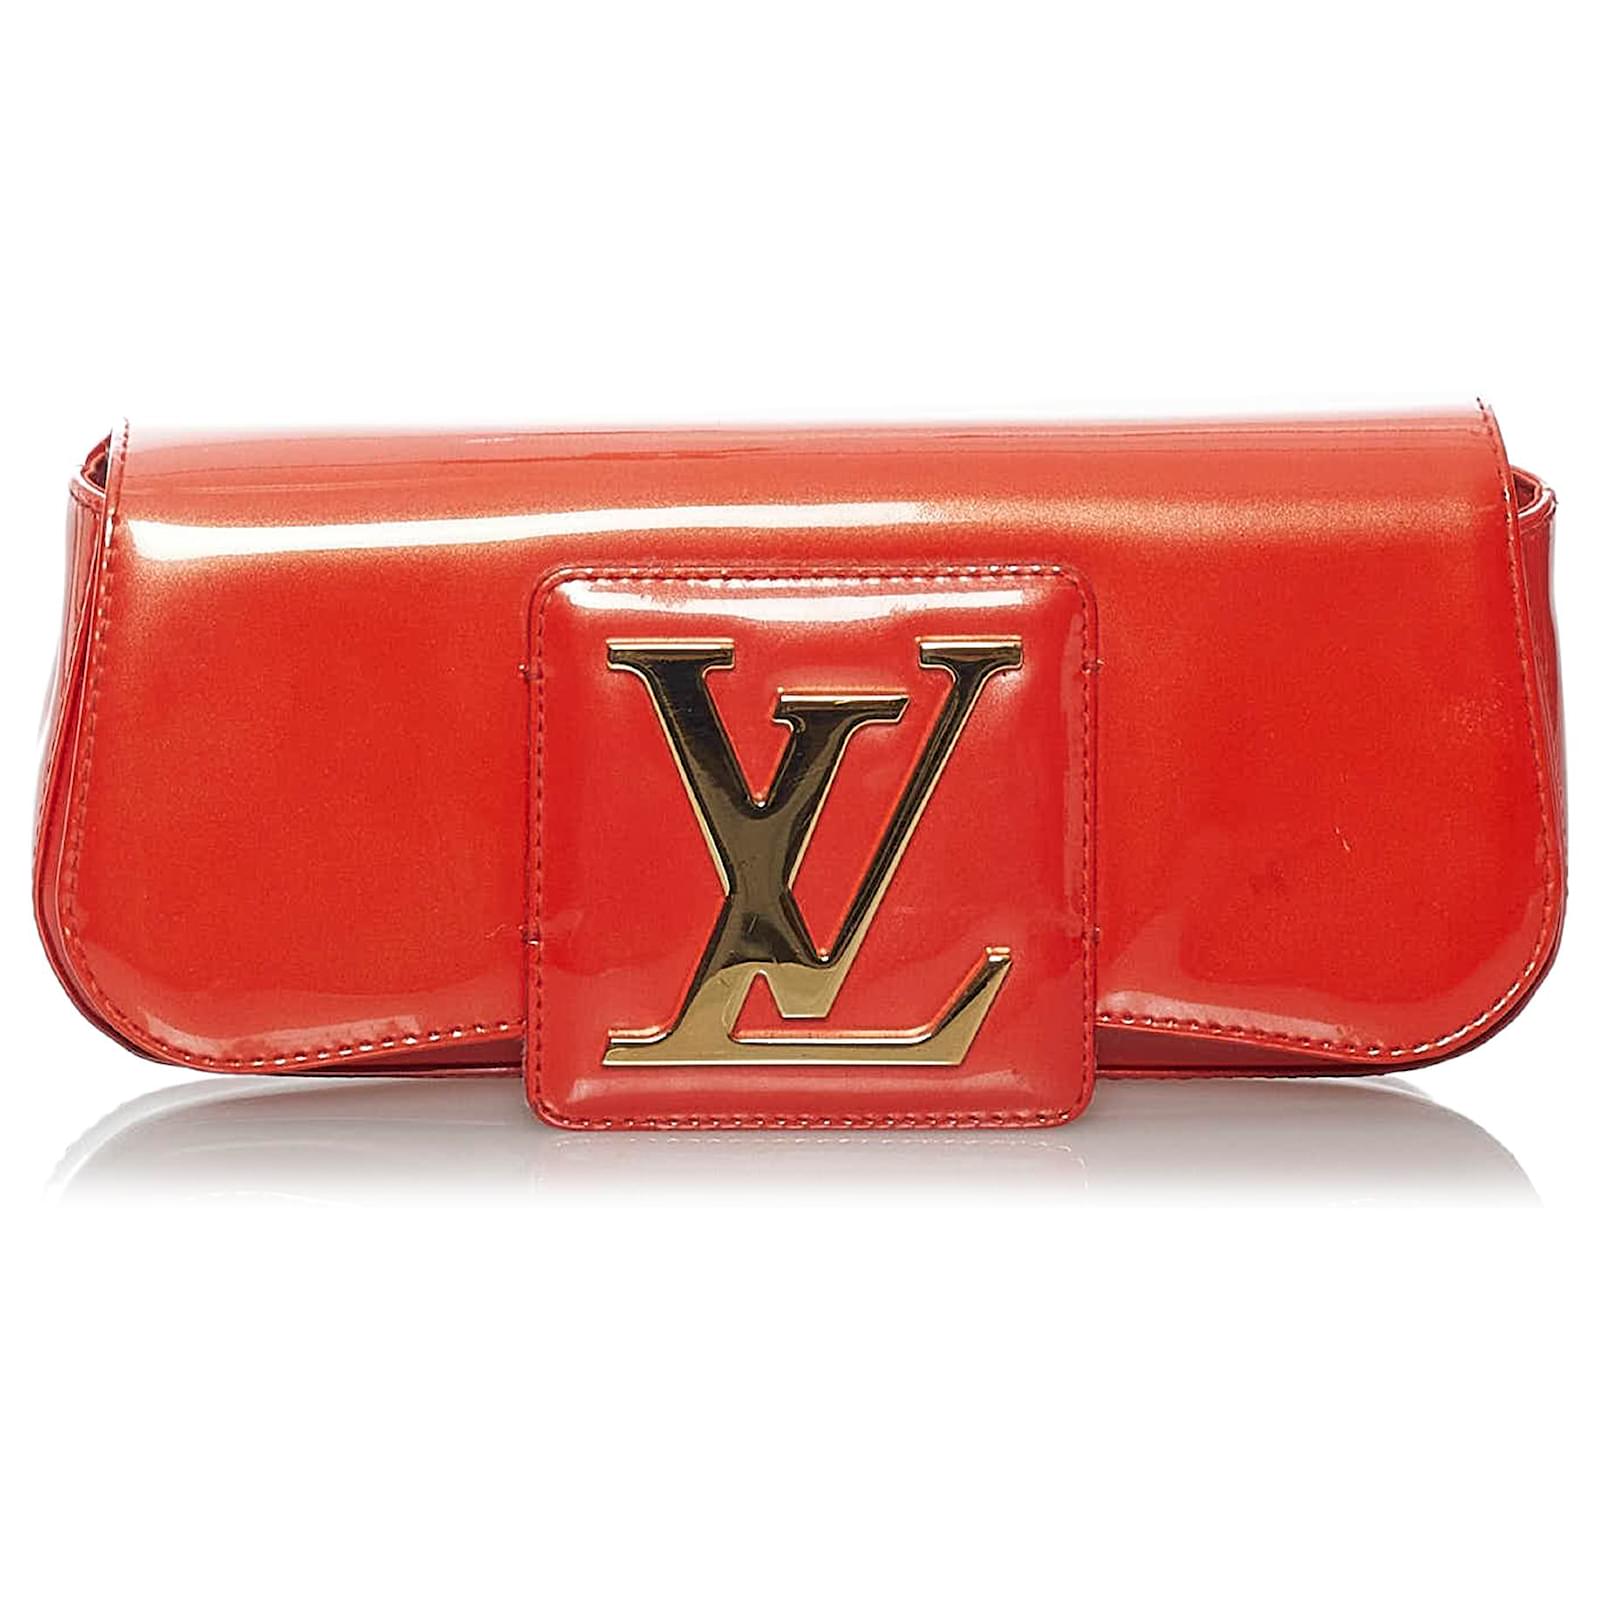 lv patent leather clutch